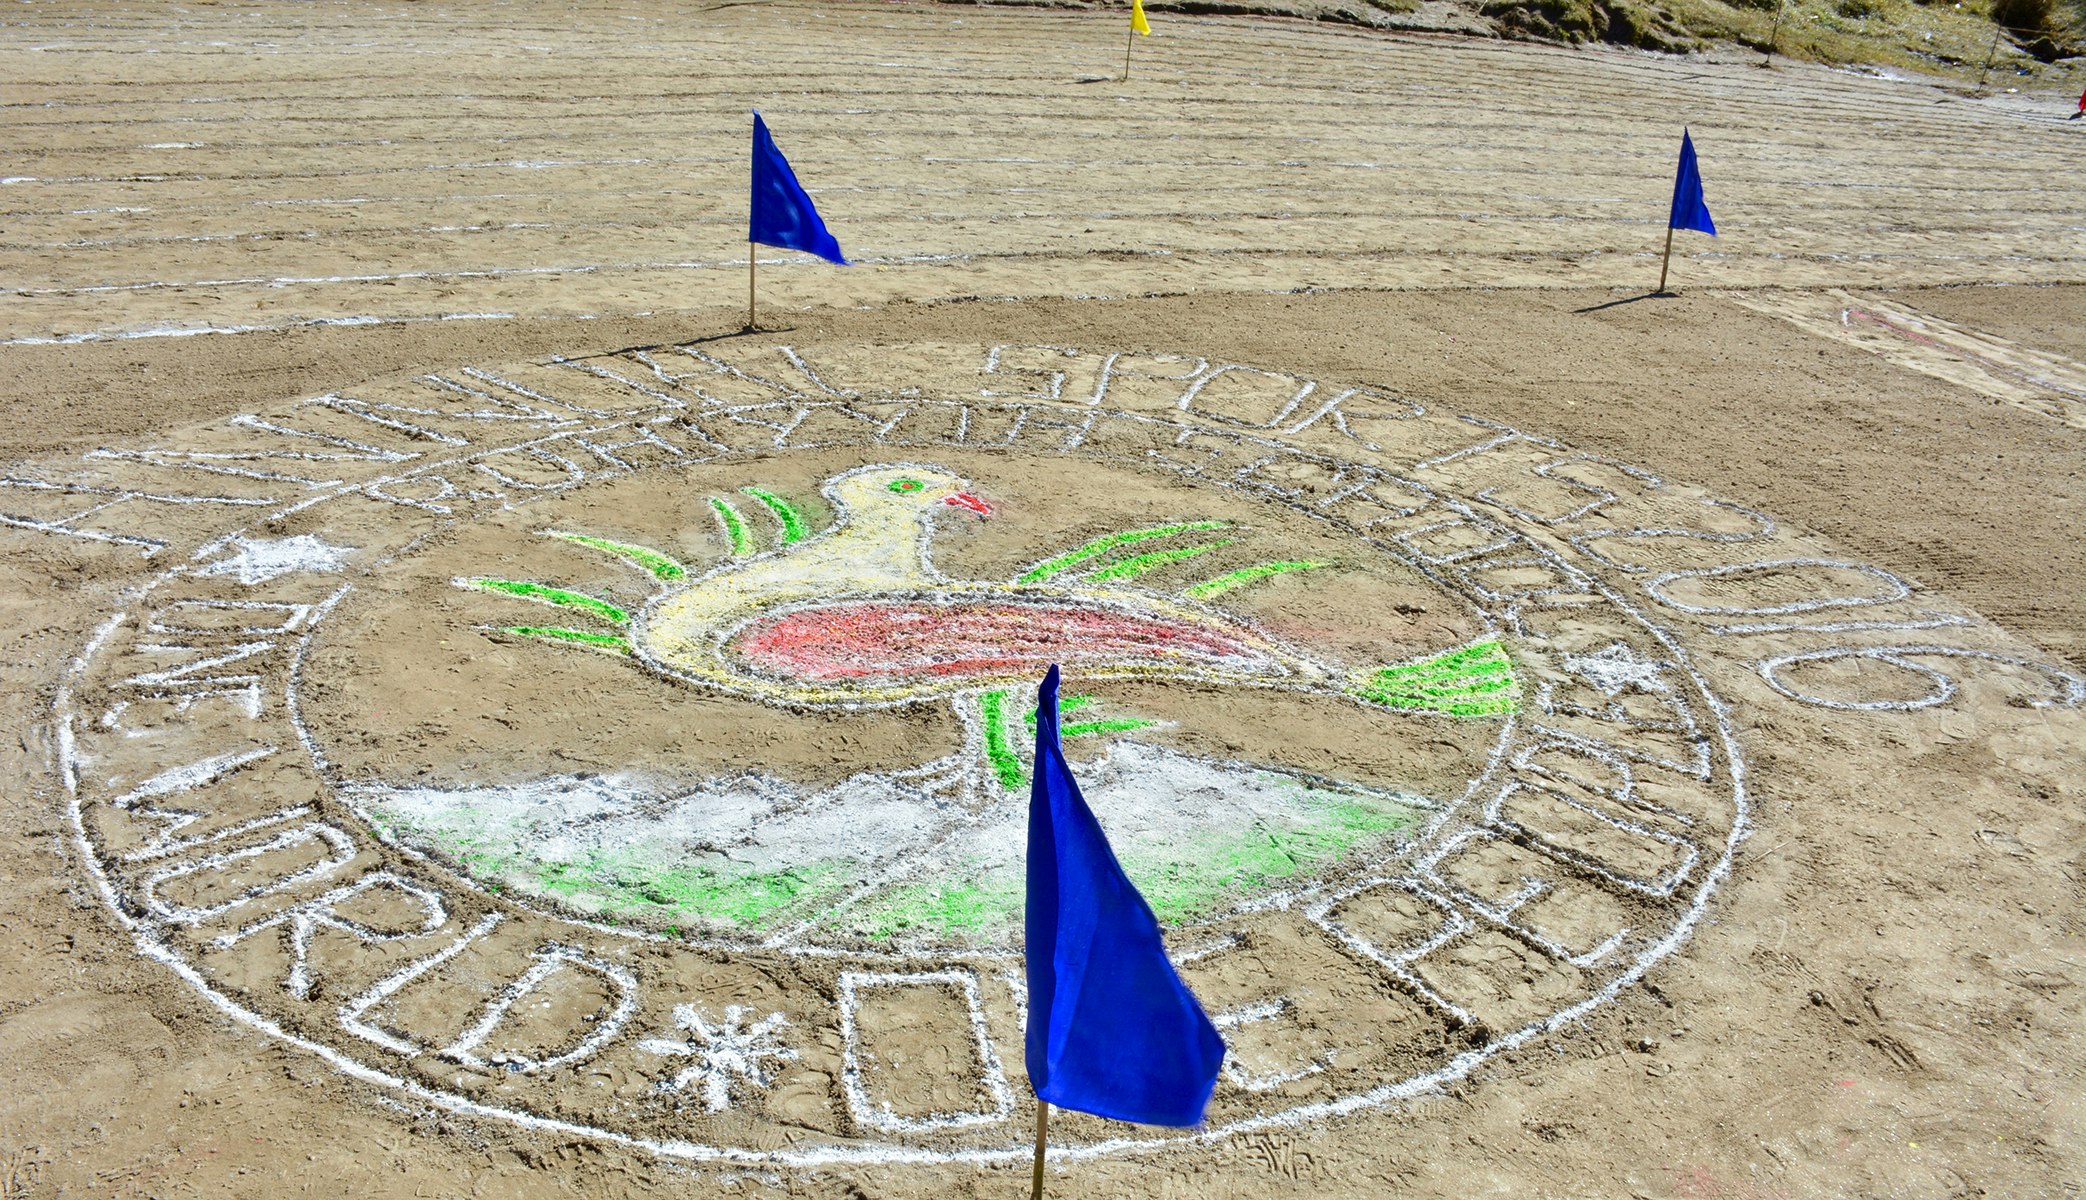 Unity in Diversity: The vibrant peacock logo of our school, adorned with the empowering message 'One World, One People,' takes center stage, etched beautifully on the ground with chalk, embraced by the spirit of togetherness and celebrated on sports day.